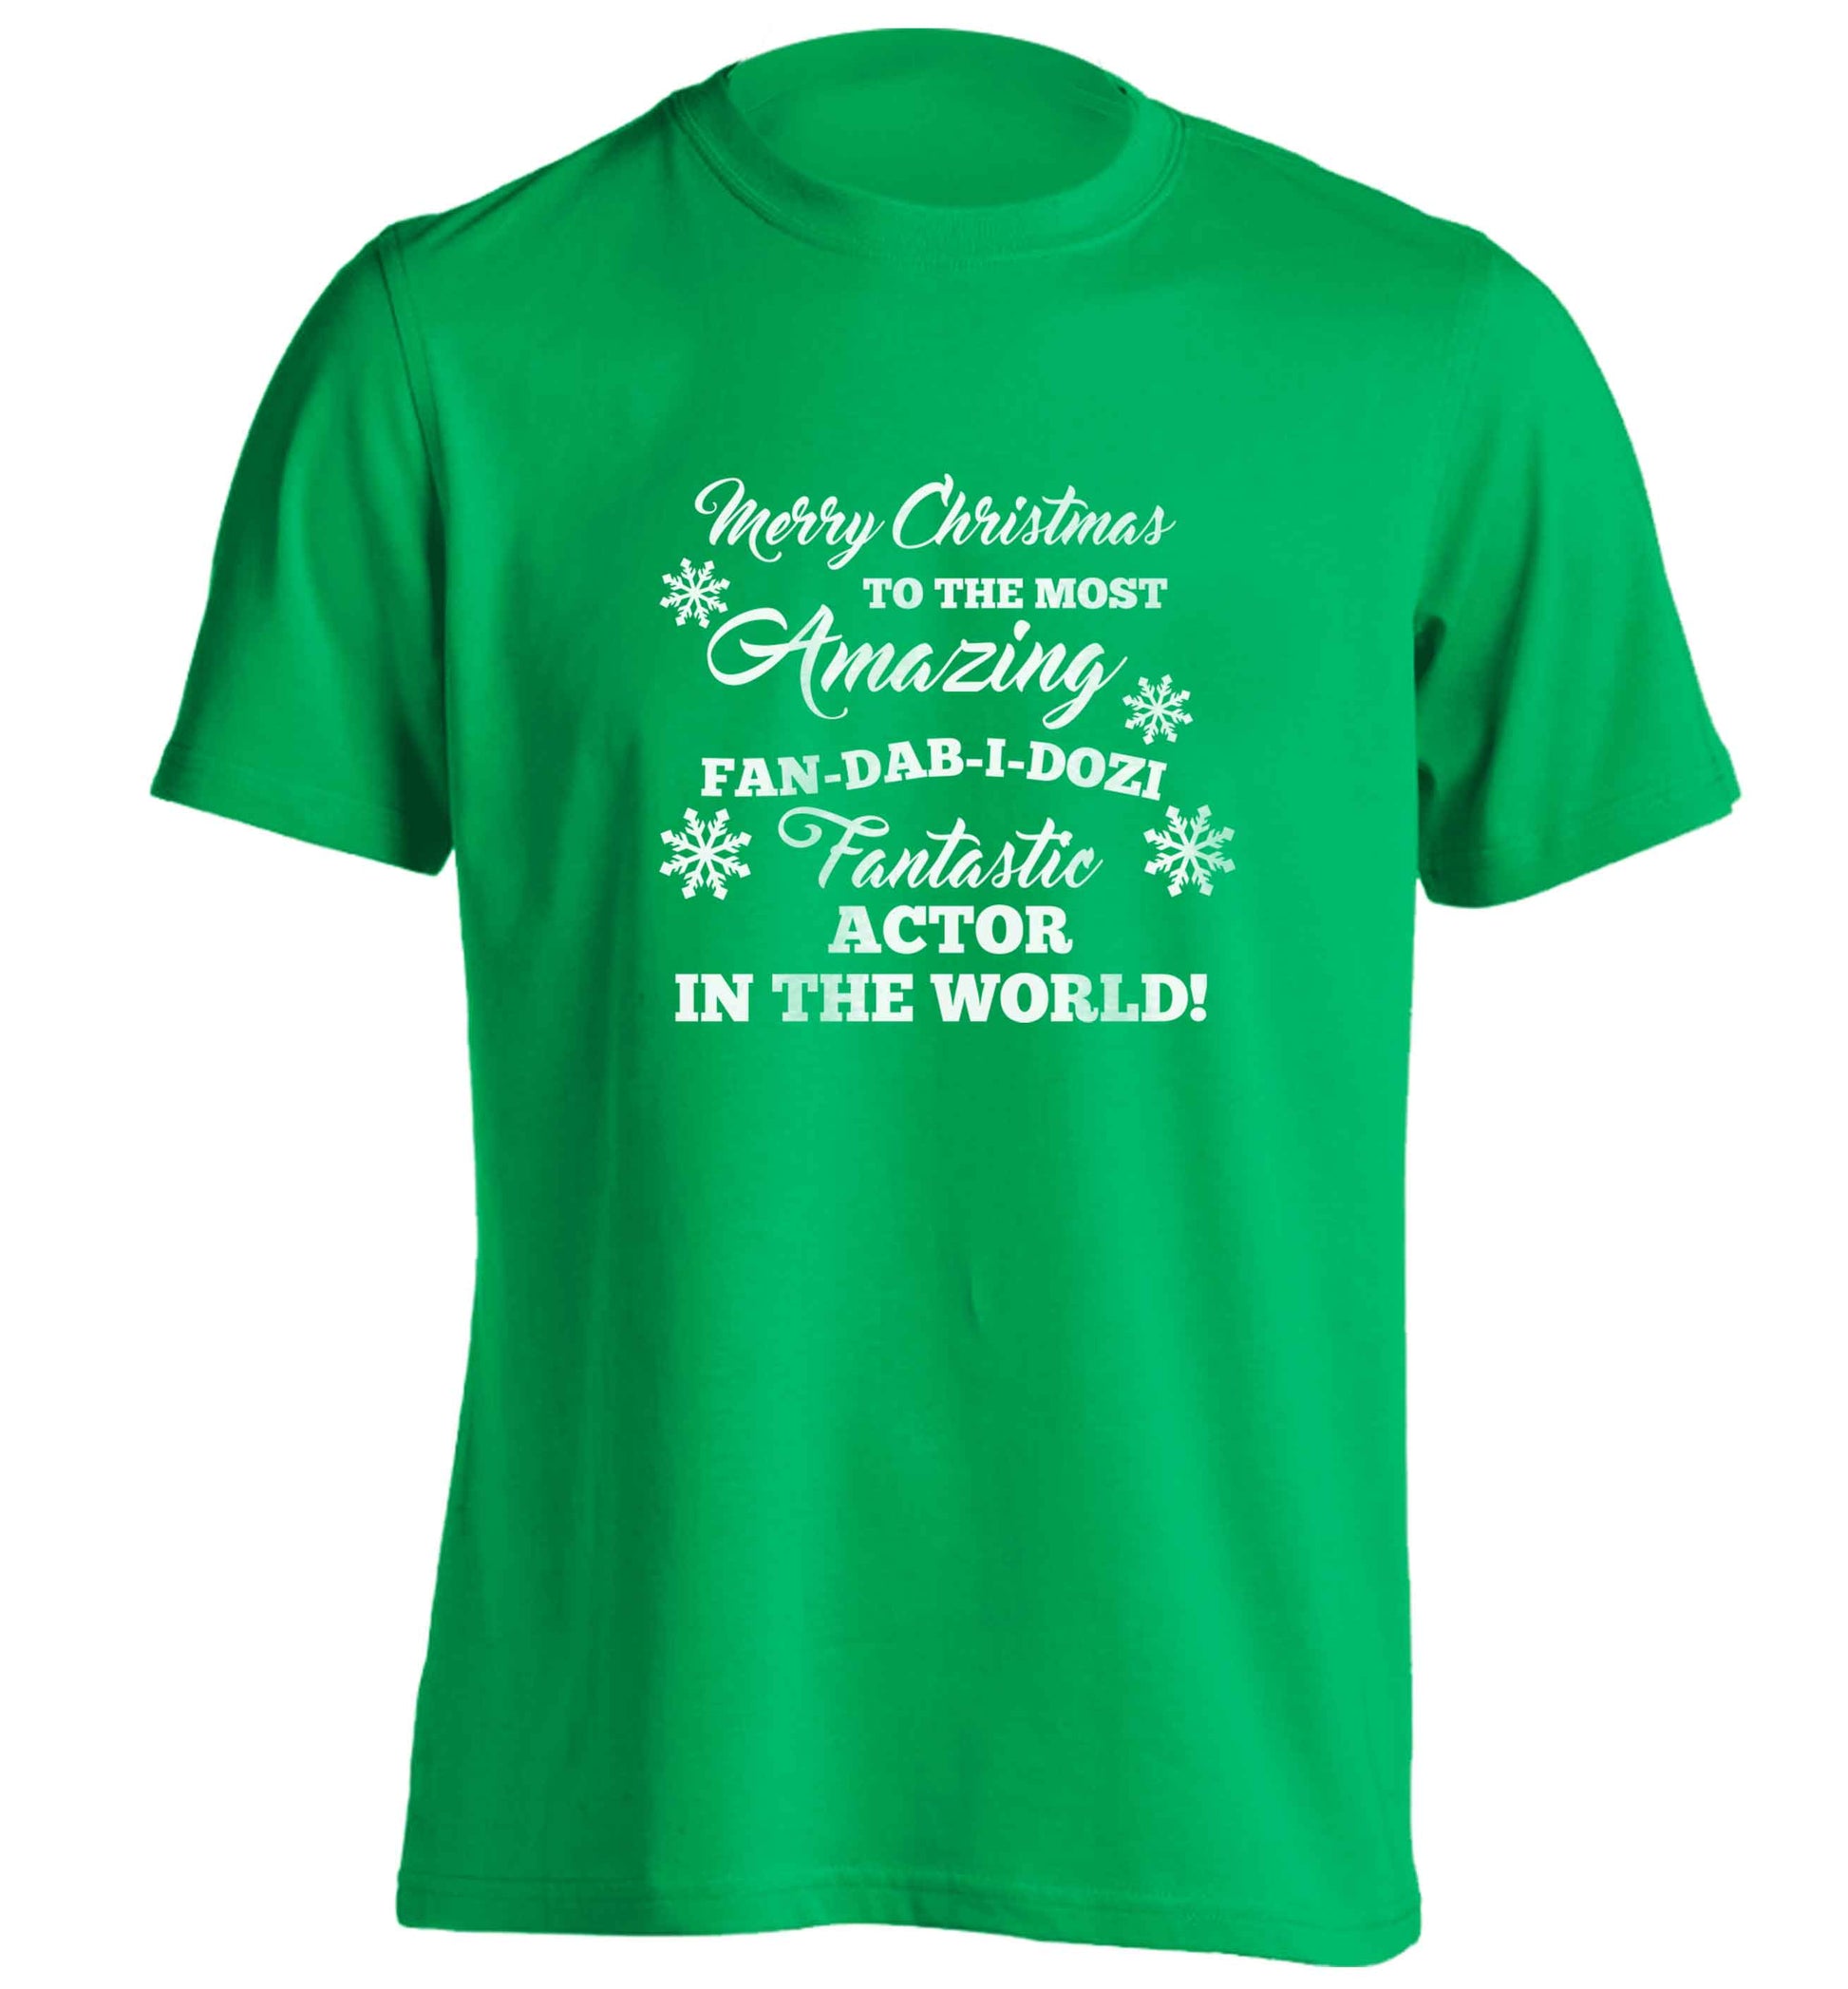 Merry Christmas to the most amazing actor in the world! adults unisex green Tshirt 2XL